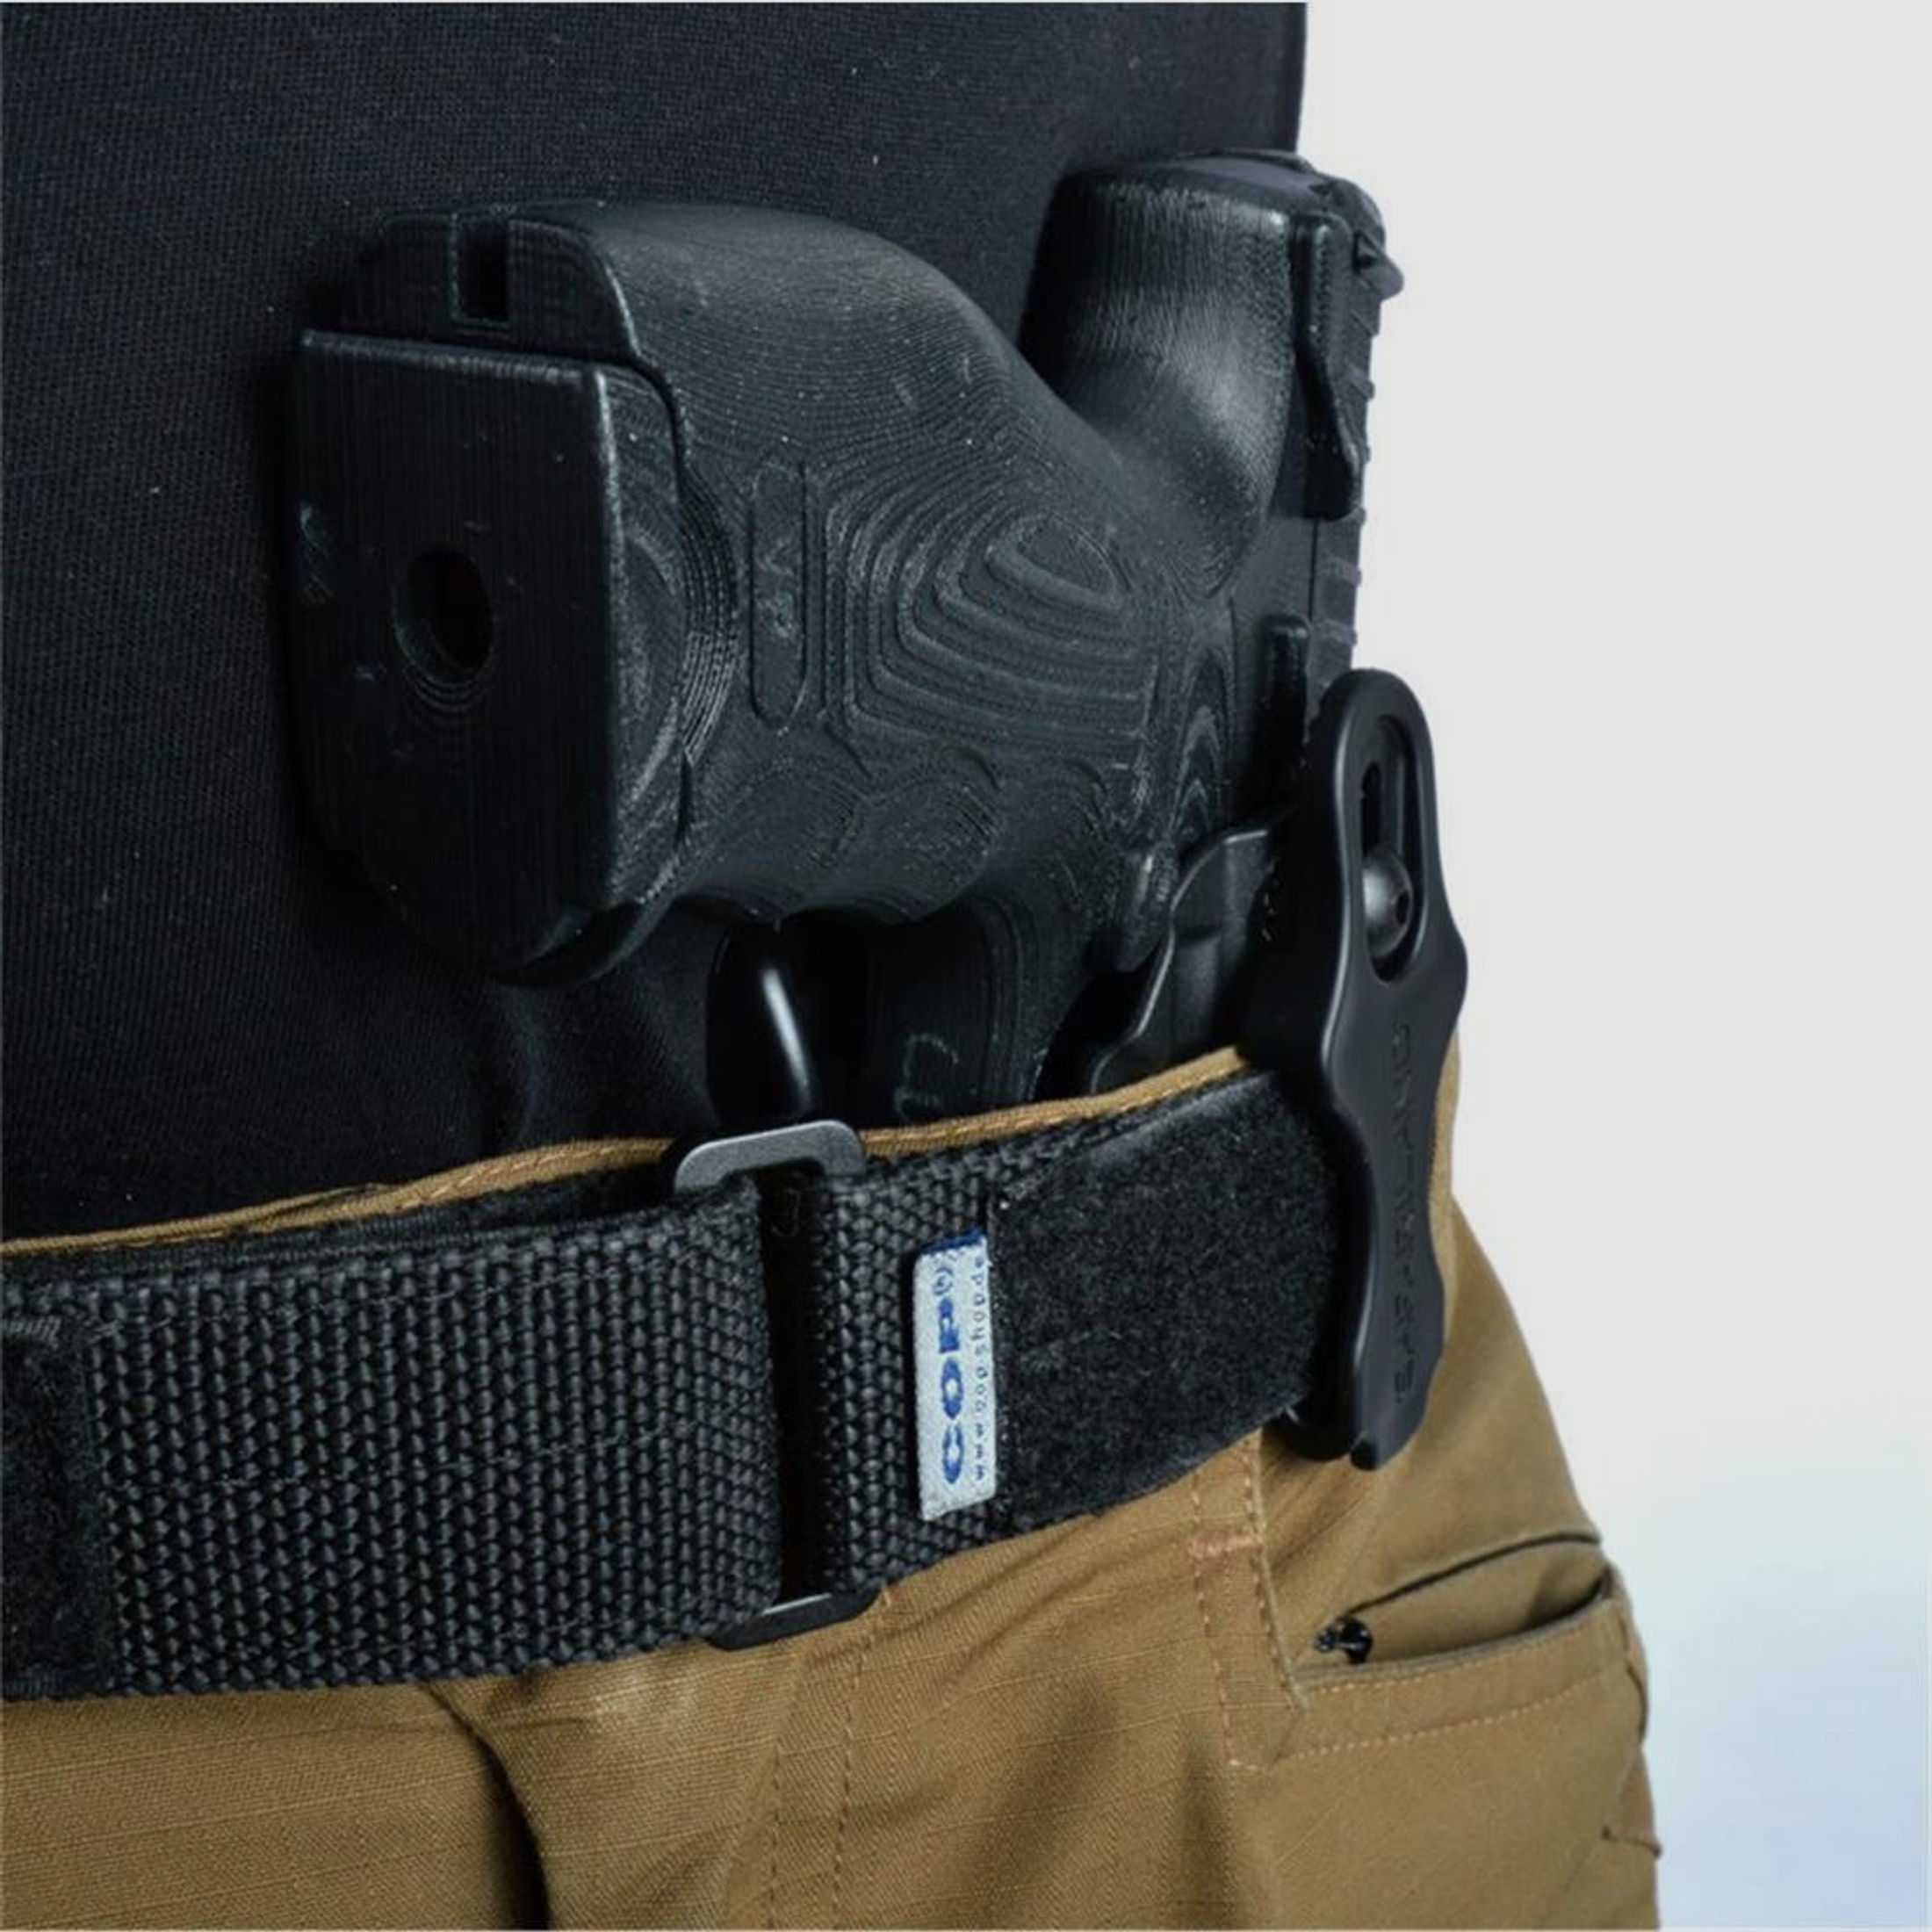 SAFARILAND 575 GLS "PRO-FIT" 7TS Innenholster (IWB) 283* Glock 19/23/29/32/38/45,H&K 45C/P2000/P30/USP Comp./VP9/VP40,S&amp;W M&amp;P.45 4"/Compact/496/SD9VE,Walther P99/PPQ/M2 4" 9mm,.40-Rechts